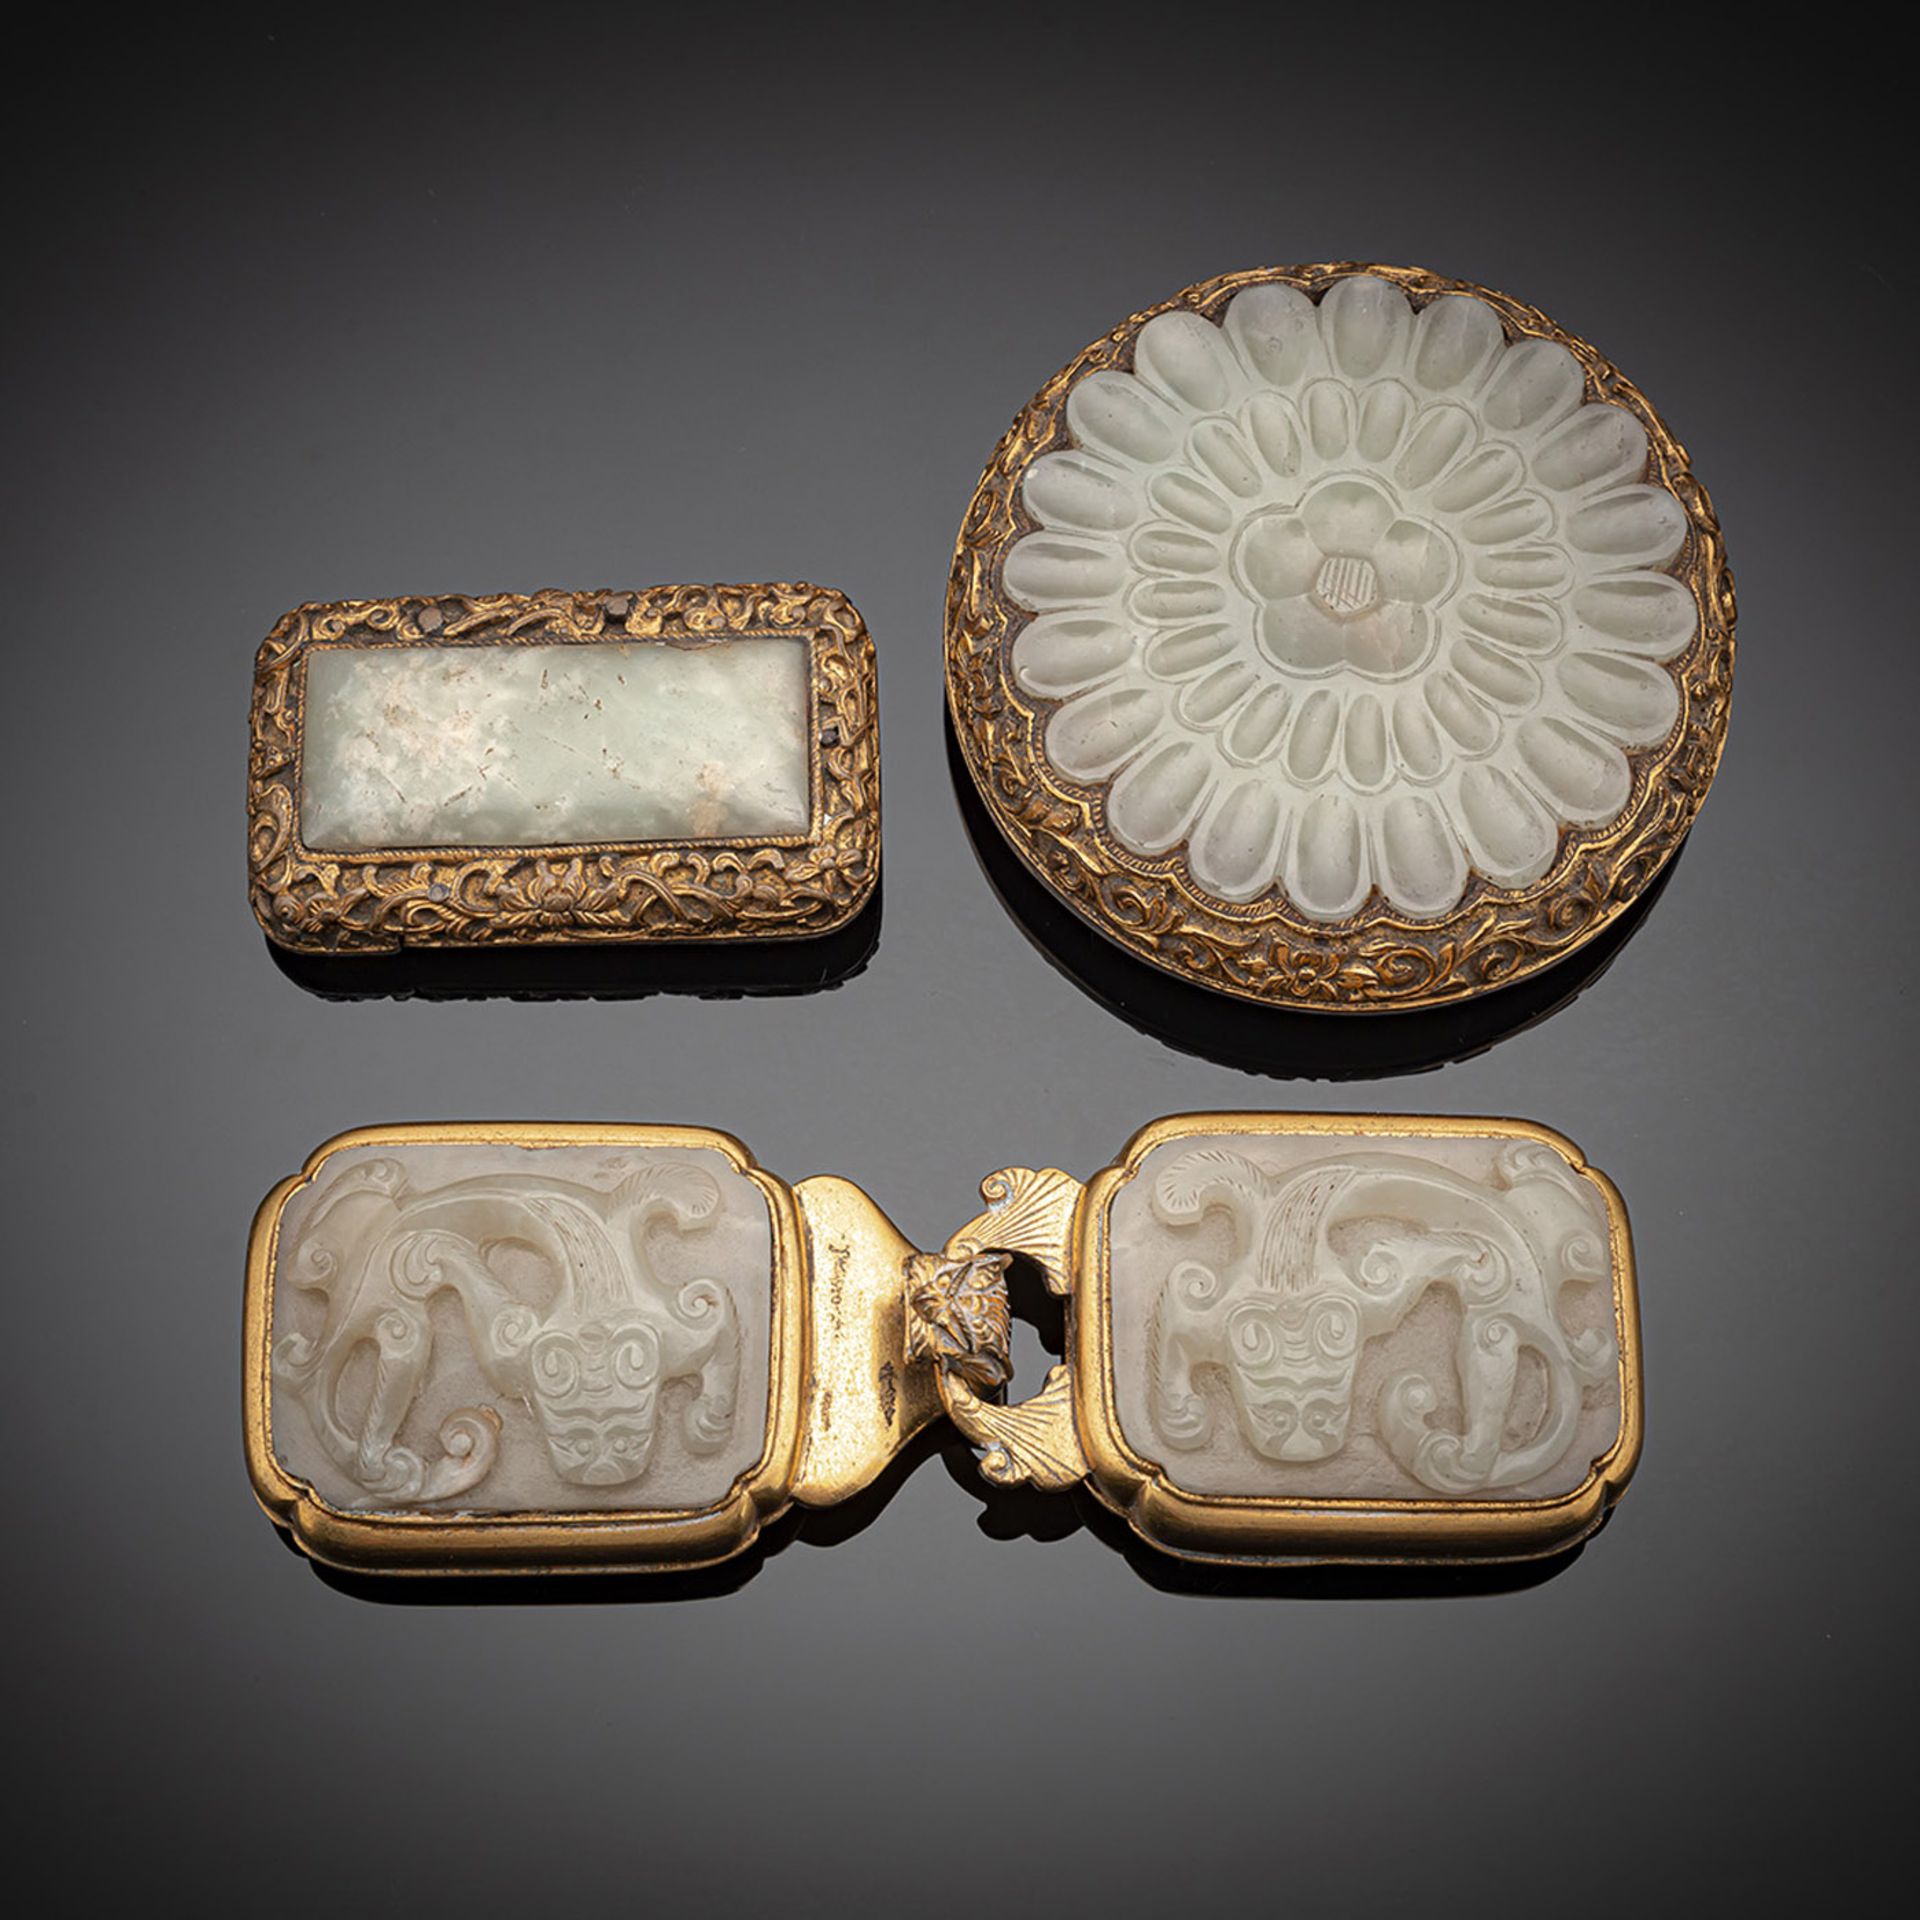 A GROUP OF THREE FINE GILT-BRONZE AND JADE-INLAID BELT BUCKLES